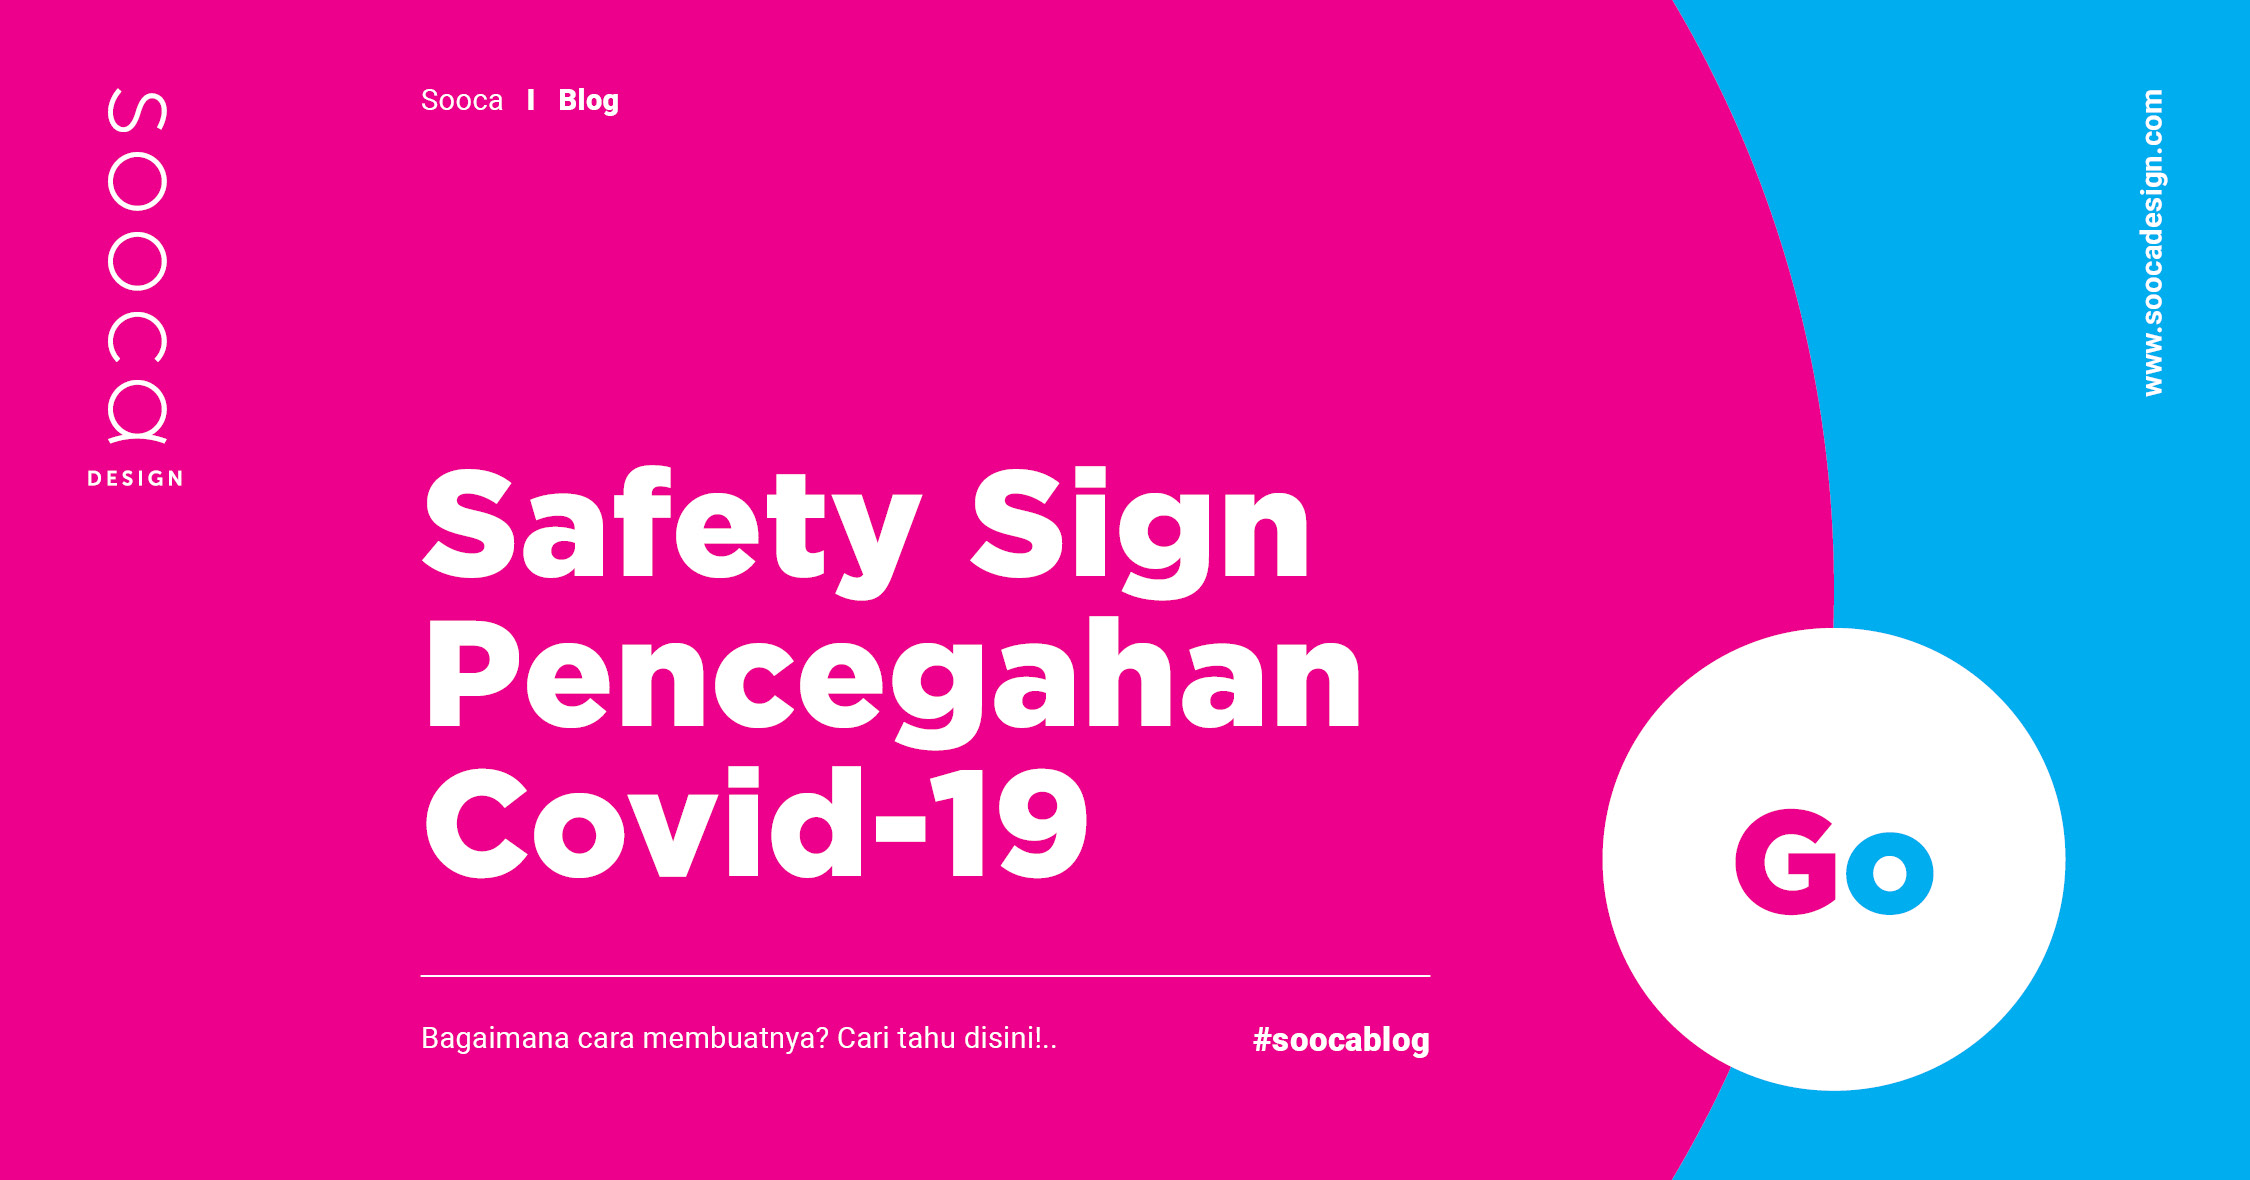 standar safety sign di Indonesia